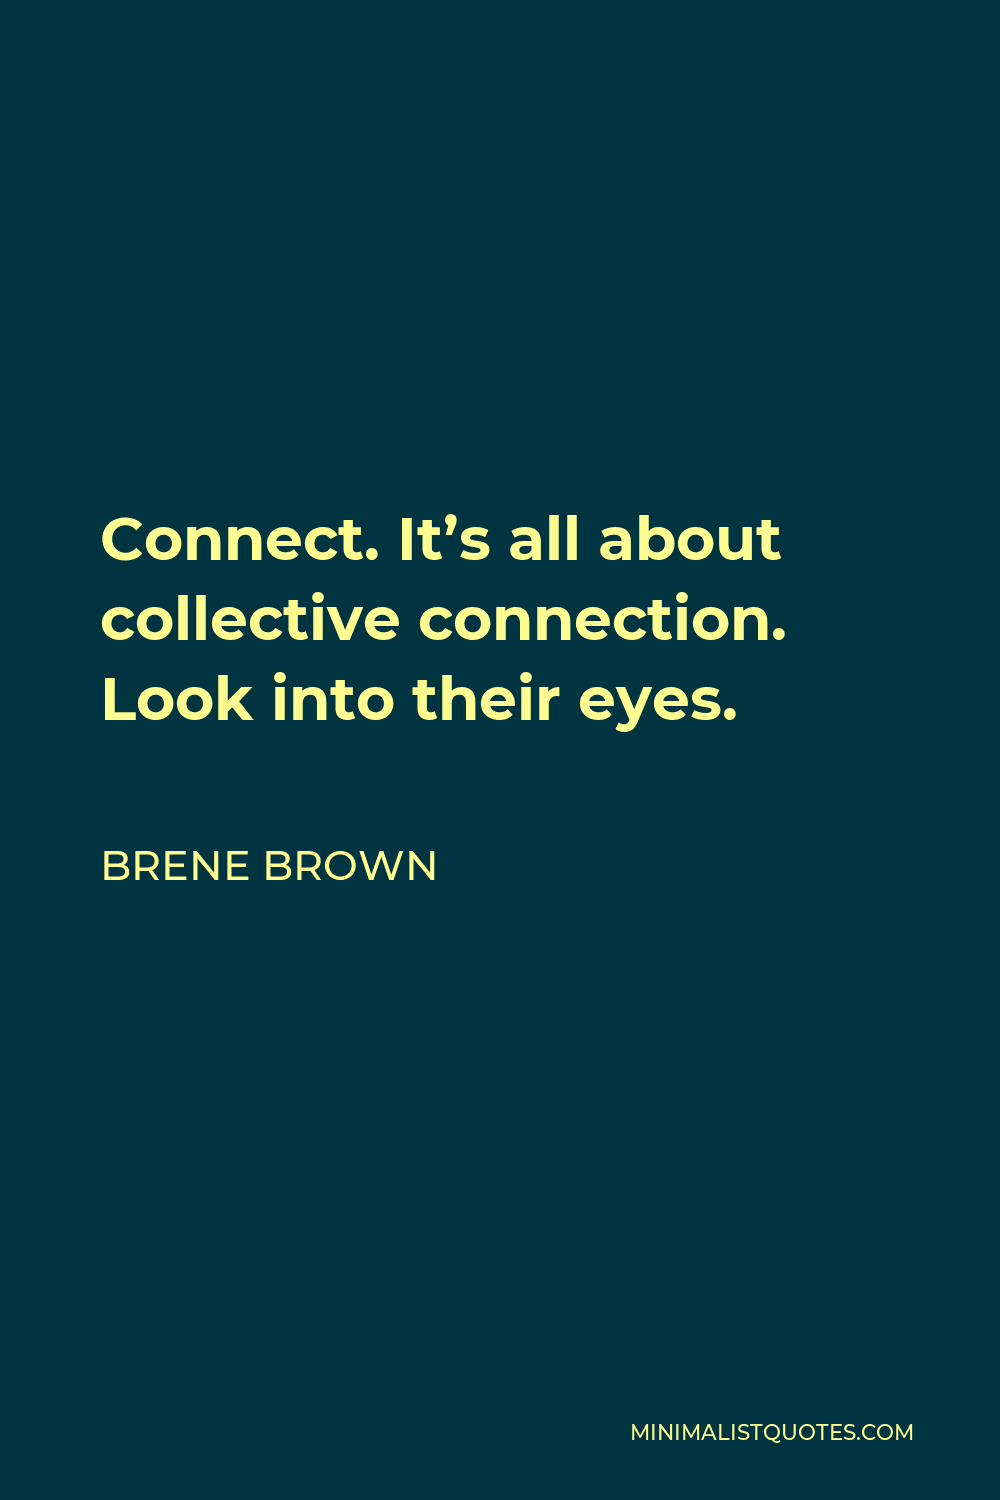 Brene Brown Quote - Connect. It’s all about collective connection. Look into their eyes.